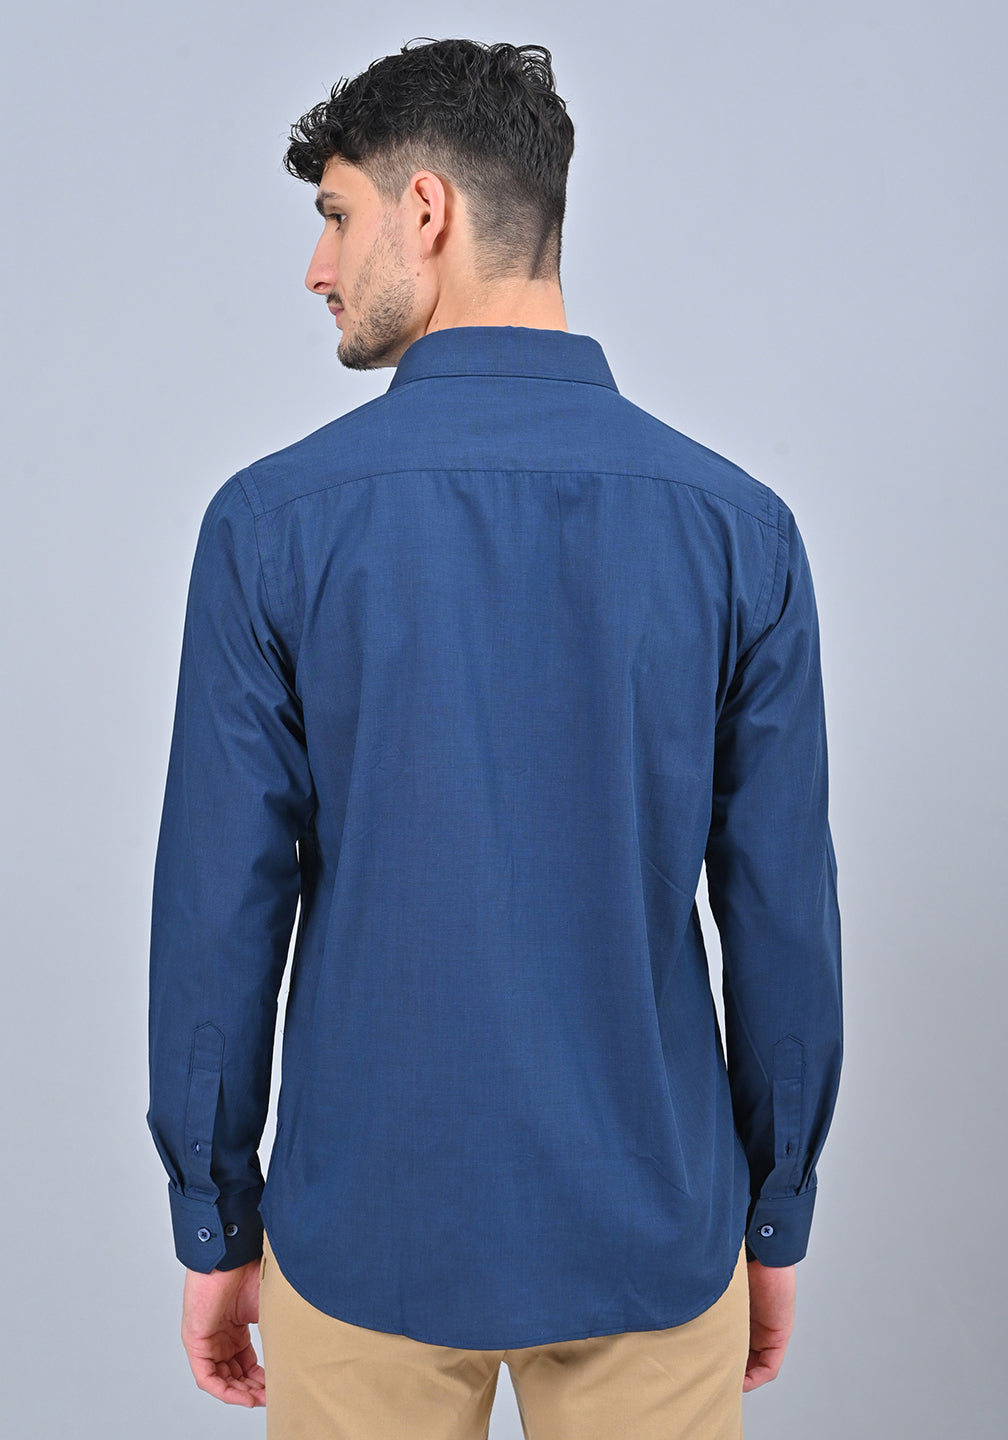 Navy Blue Colour Solid Formal Full Sleeve Shirt